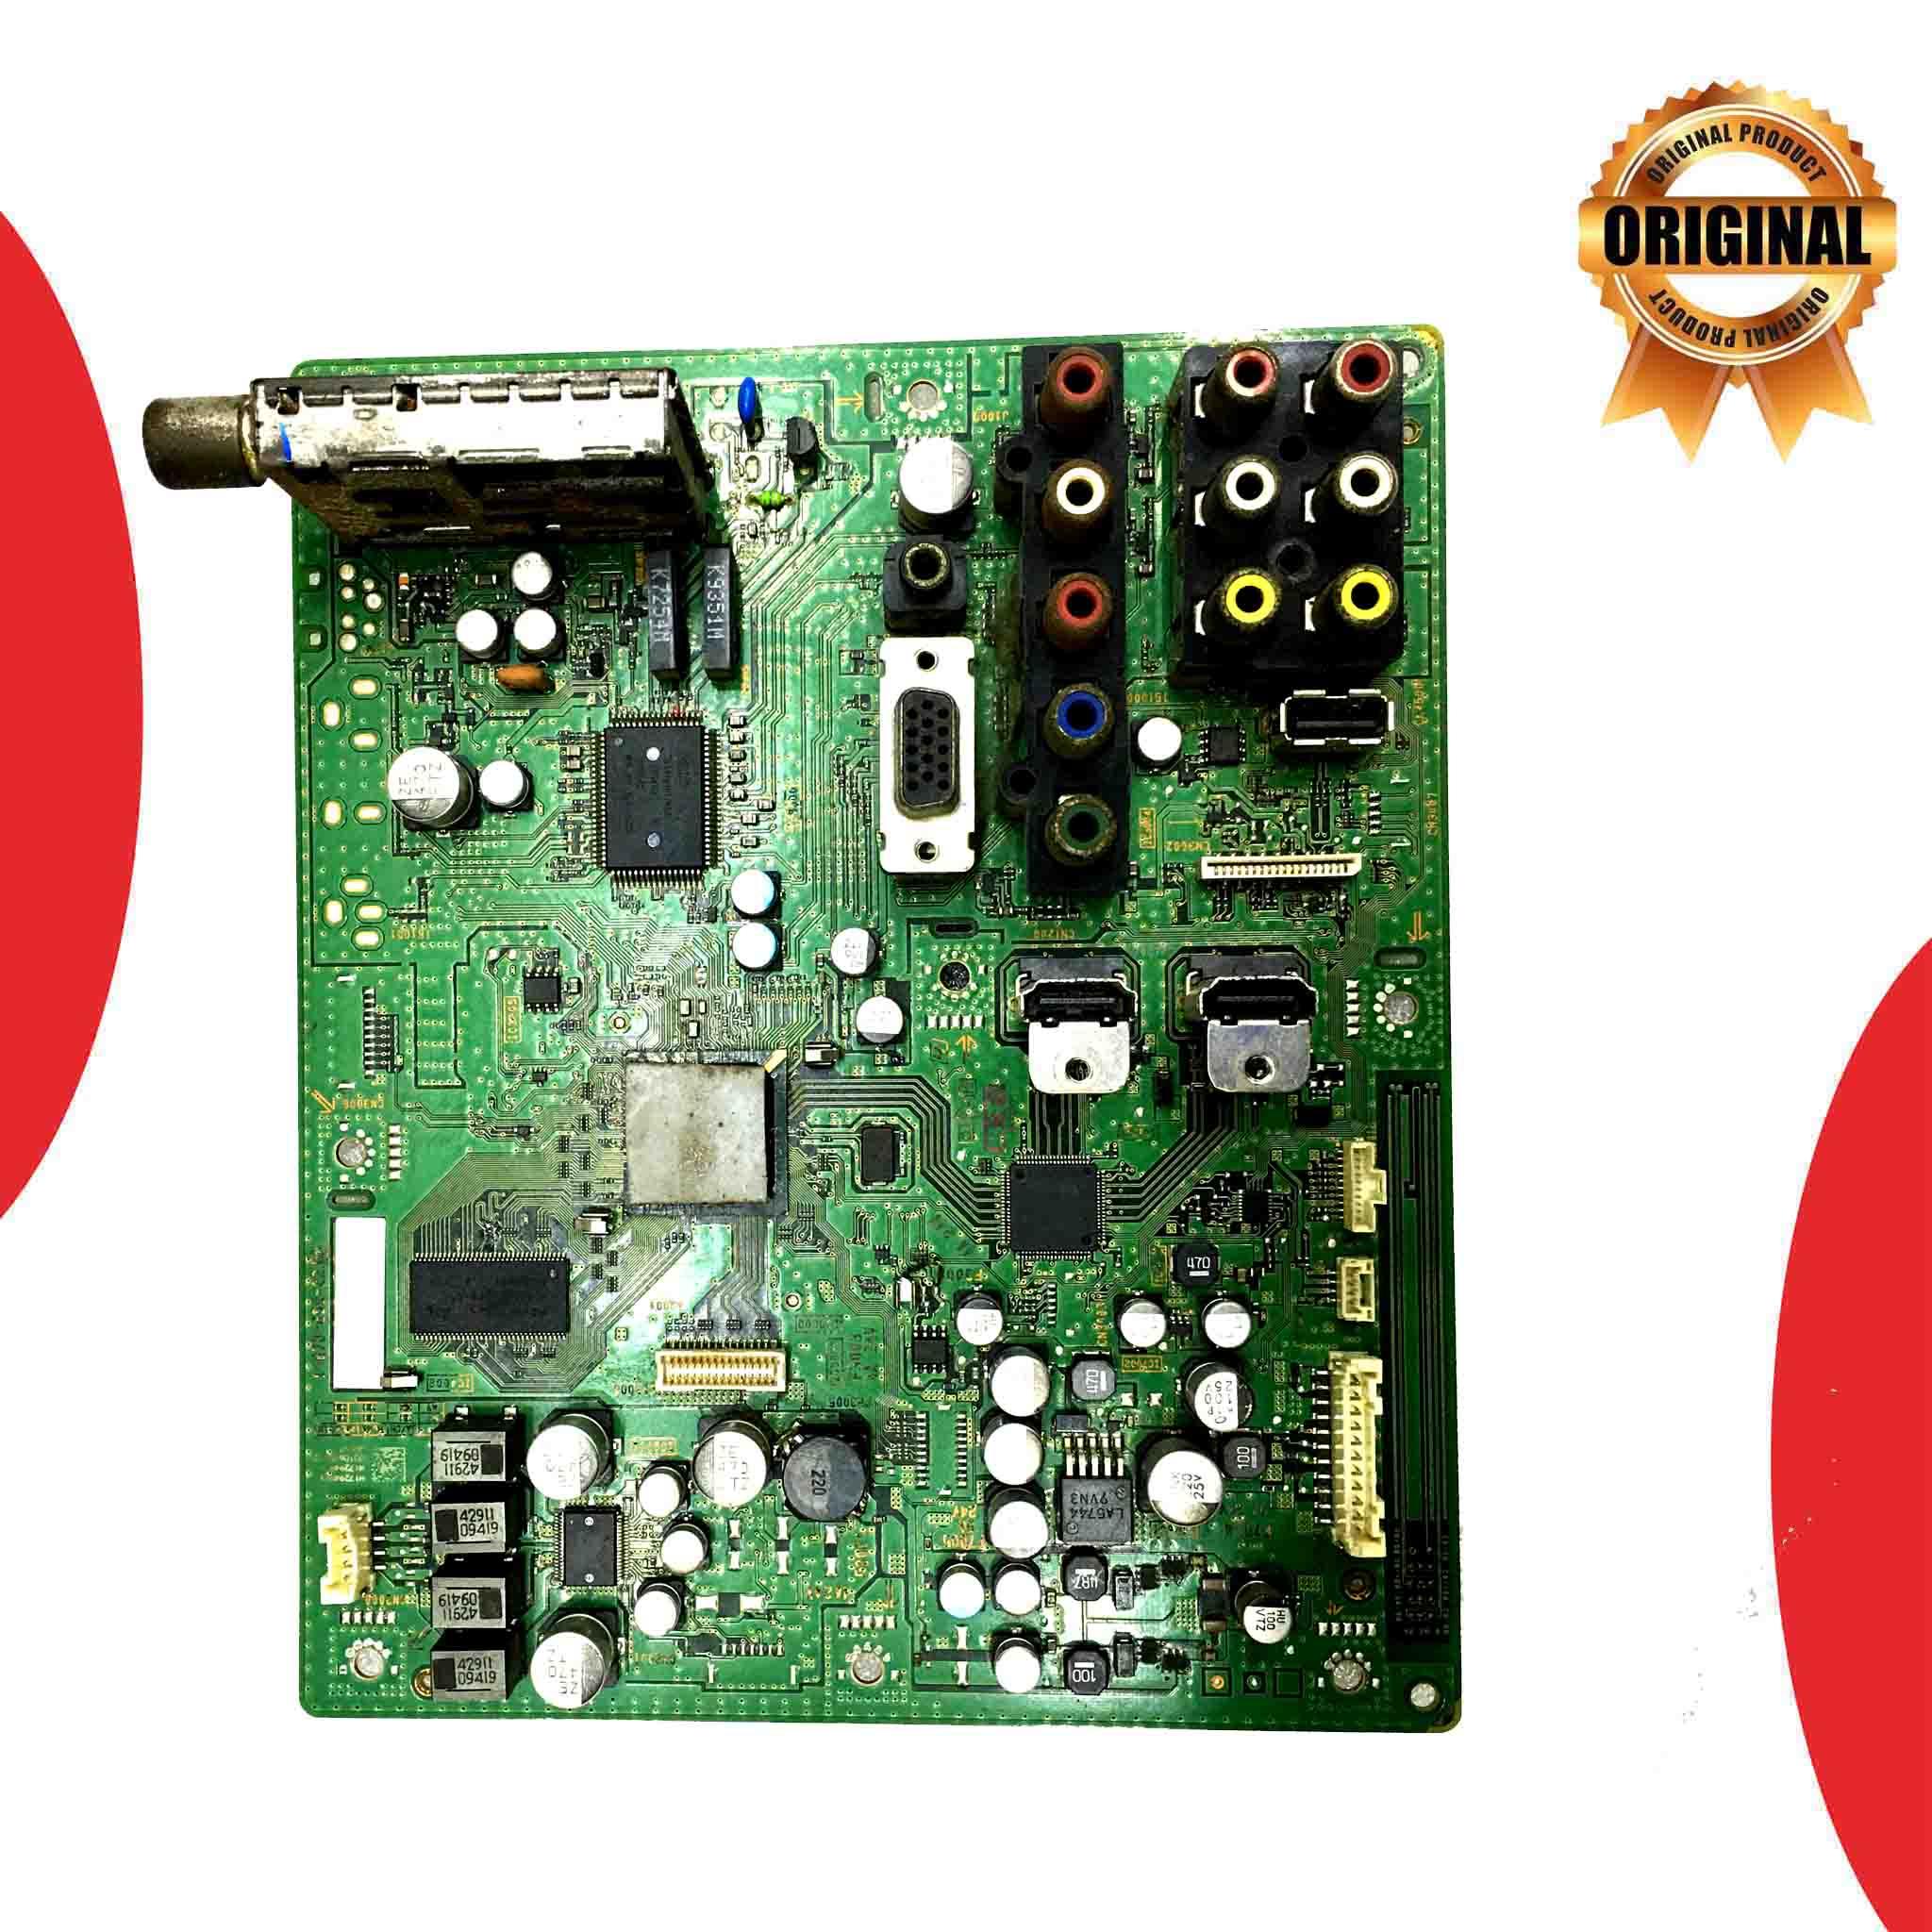 Model 32S550A Sony LCD TV Motherboard - Great Bharat Electronics